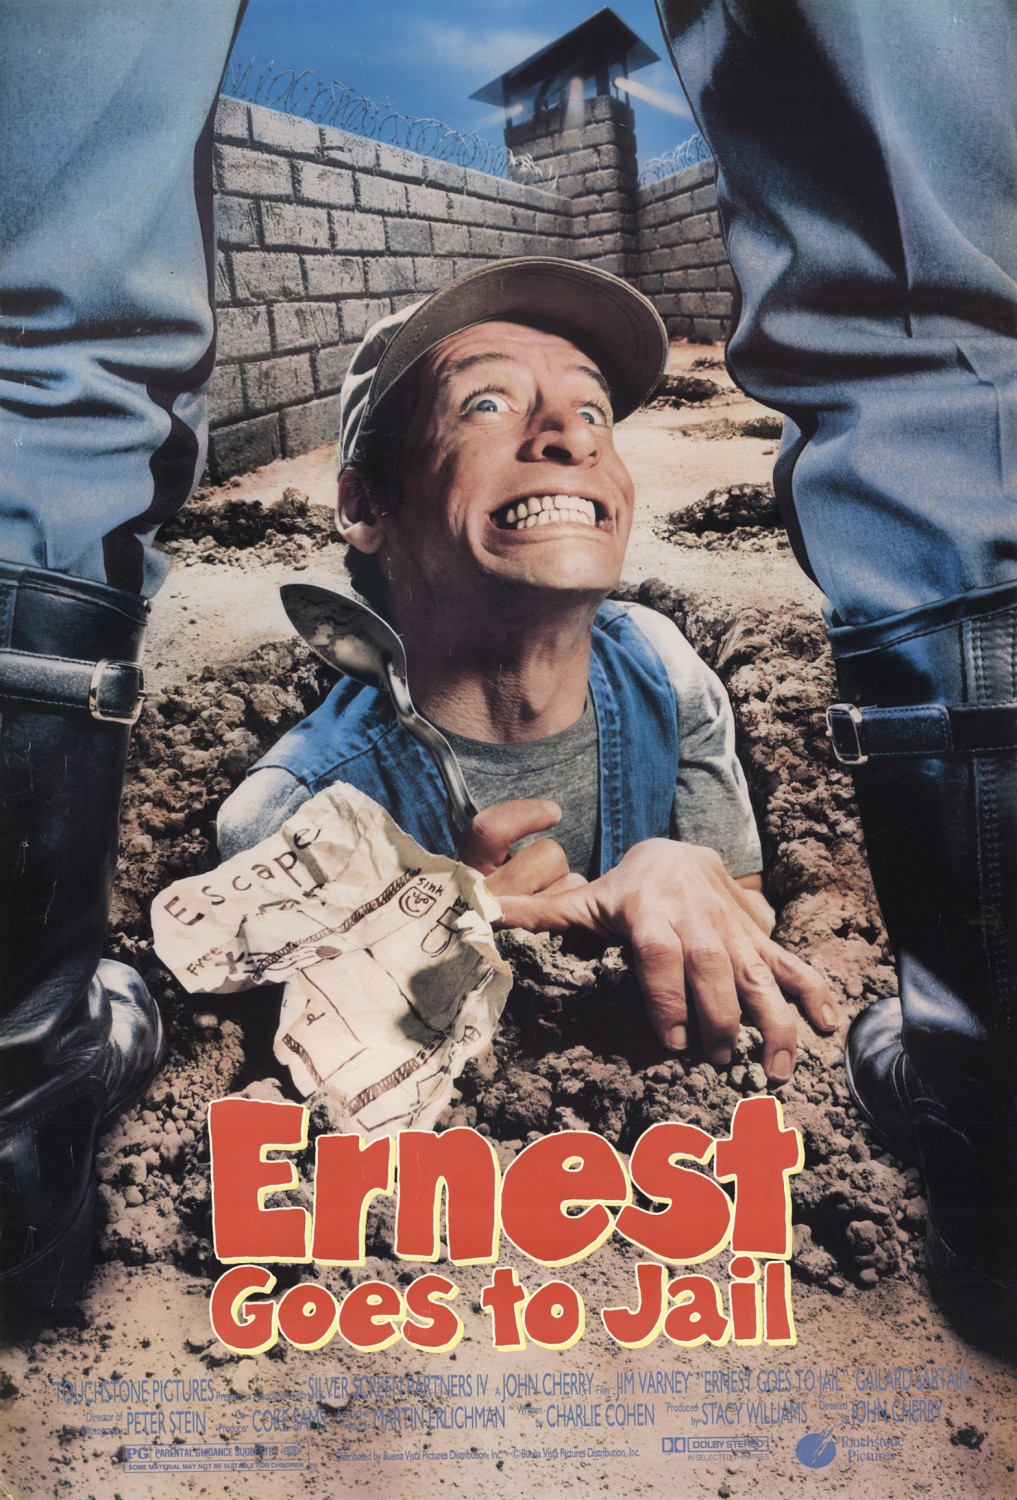 Extra Large Movie Poster Image for Ernest Goes to Jail 